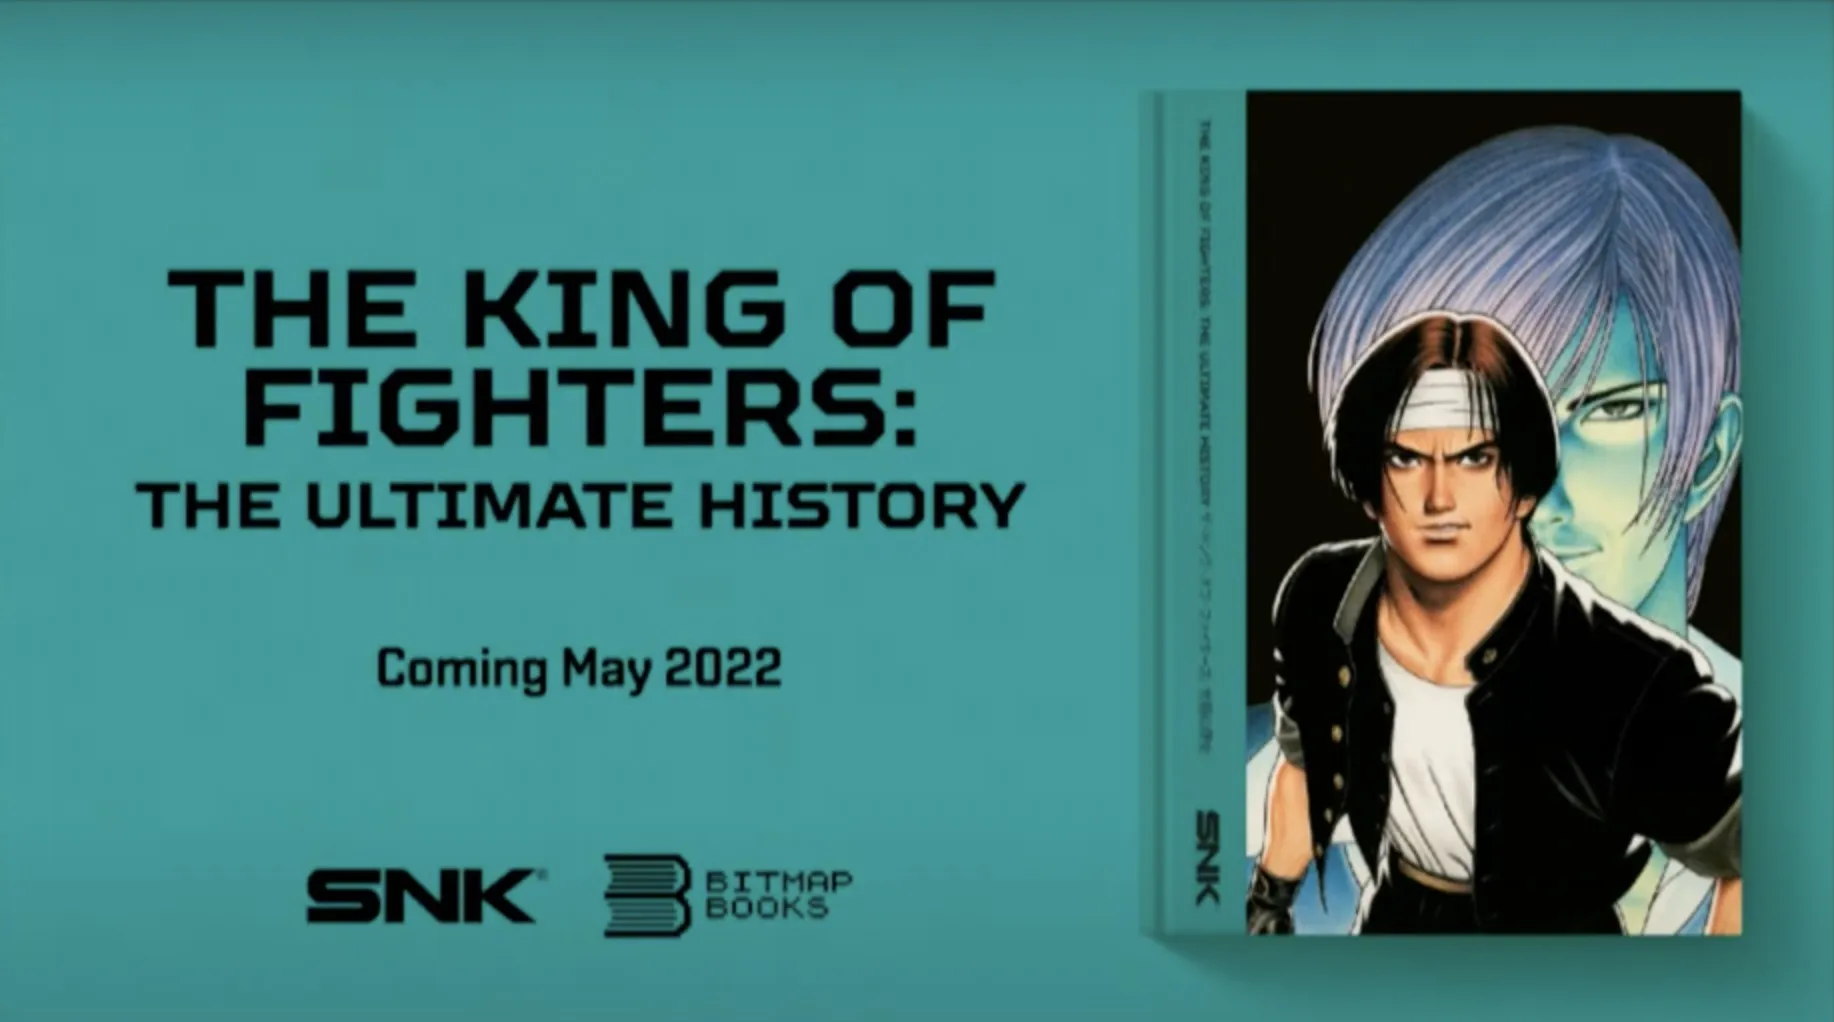 The King of Fighters: The Ultimate History Book Will Appear in May